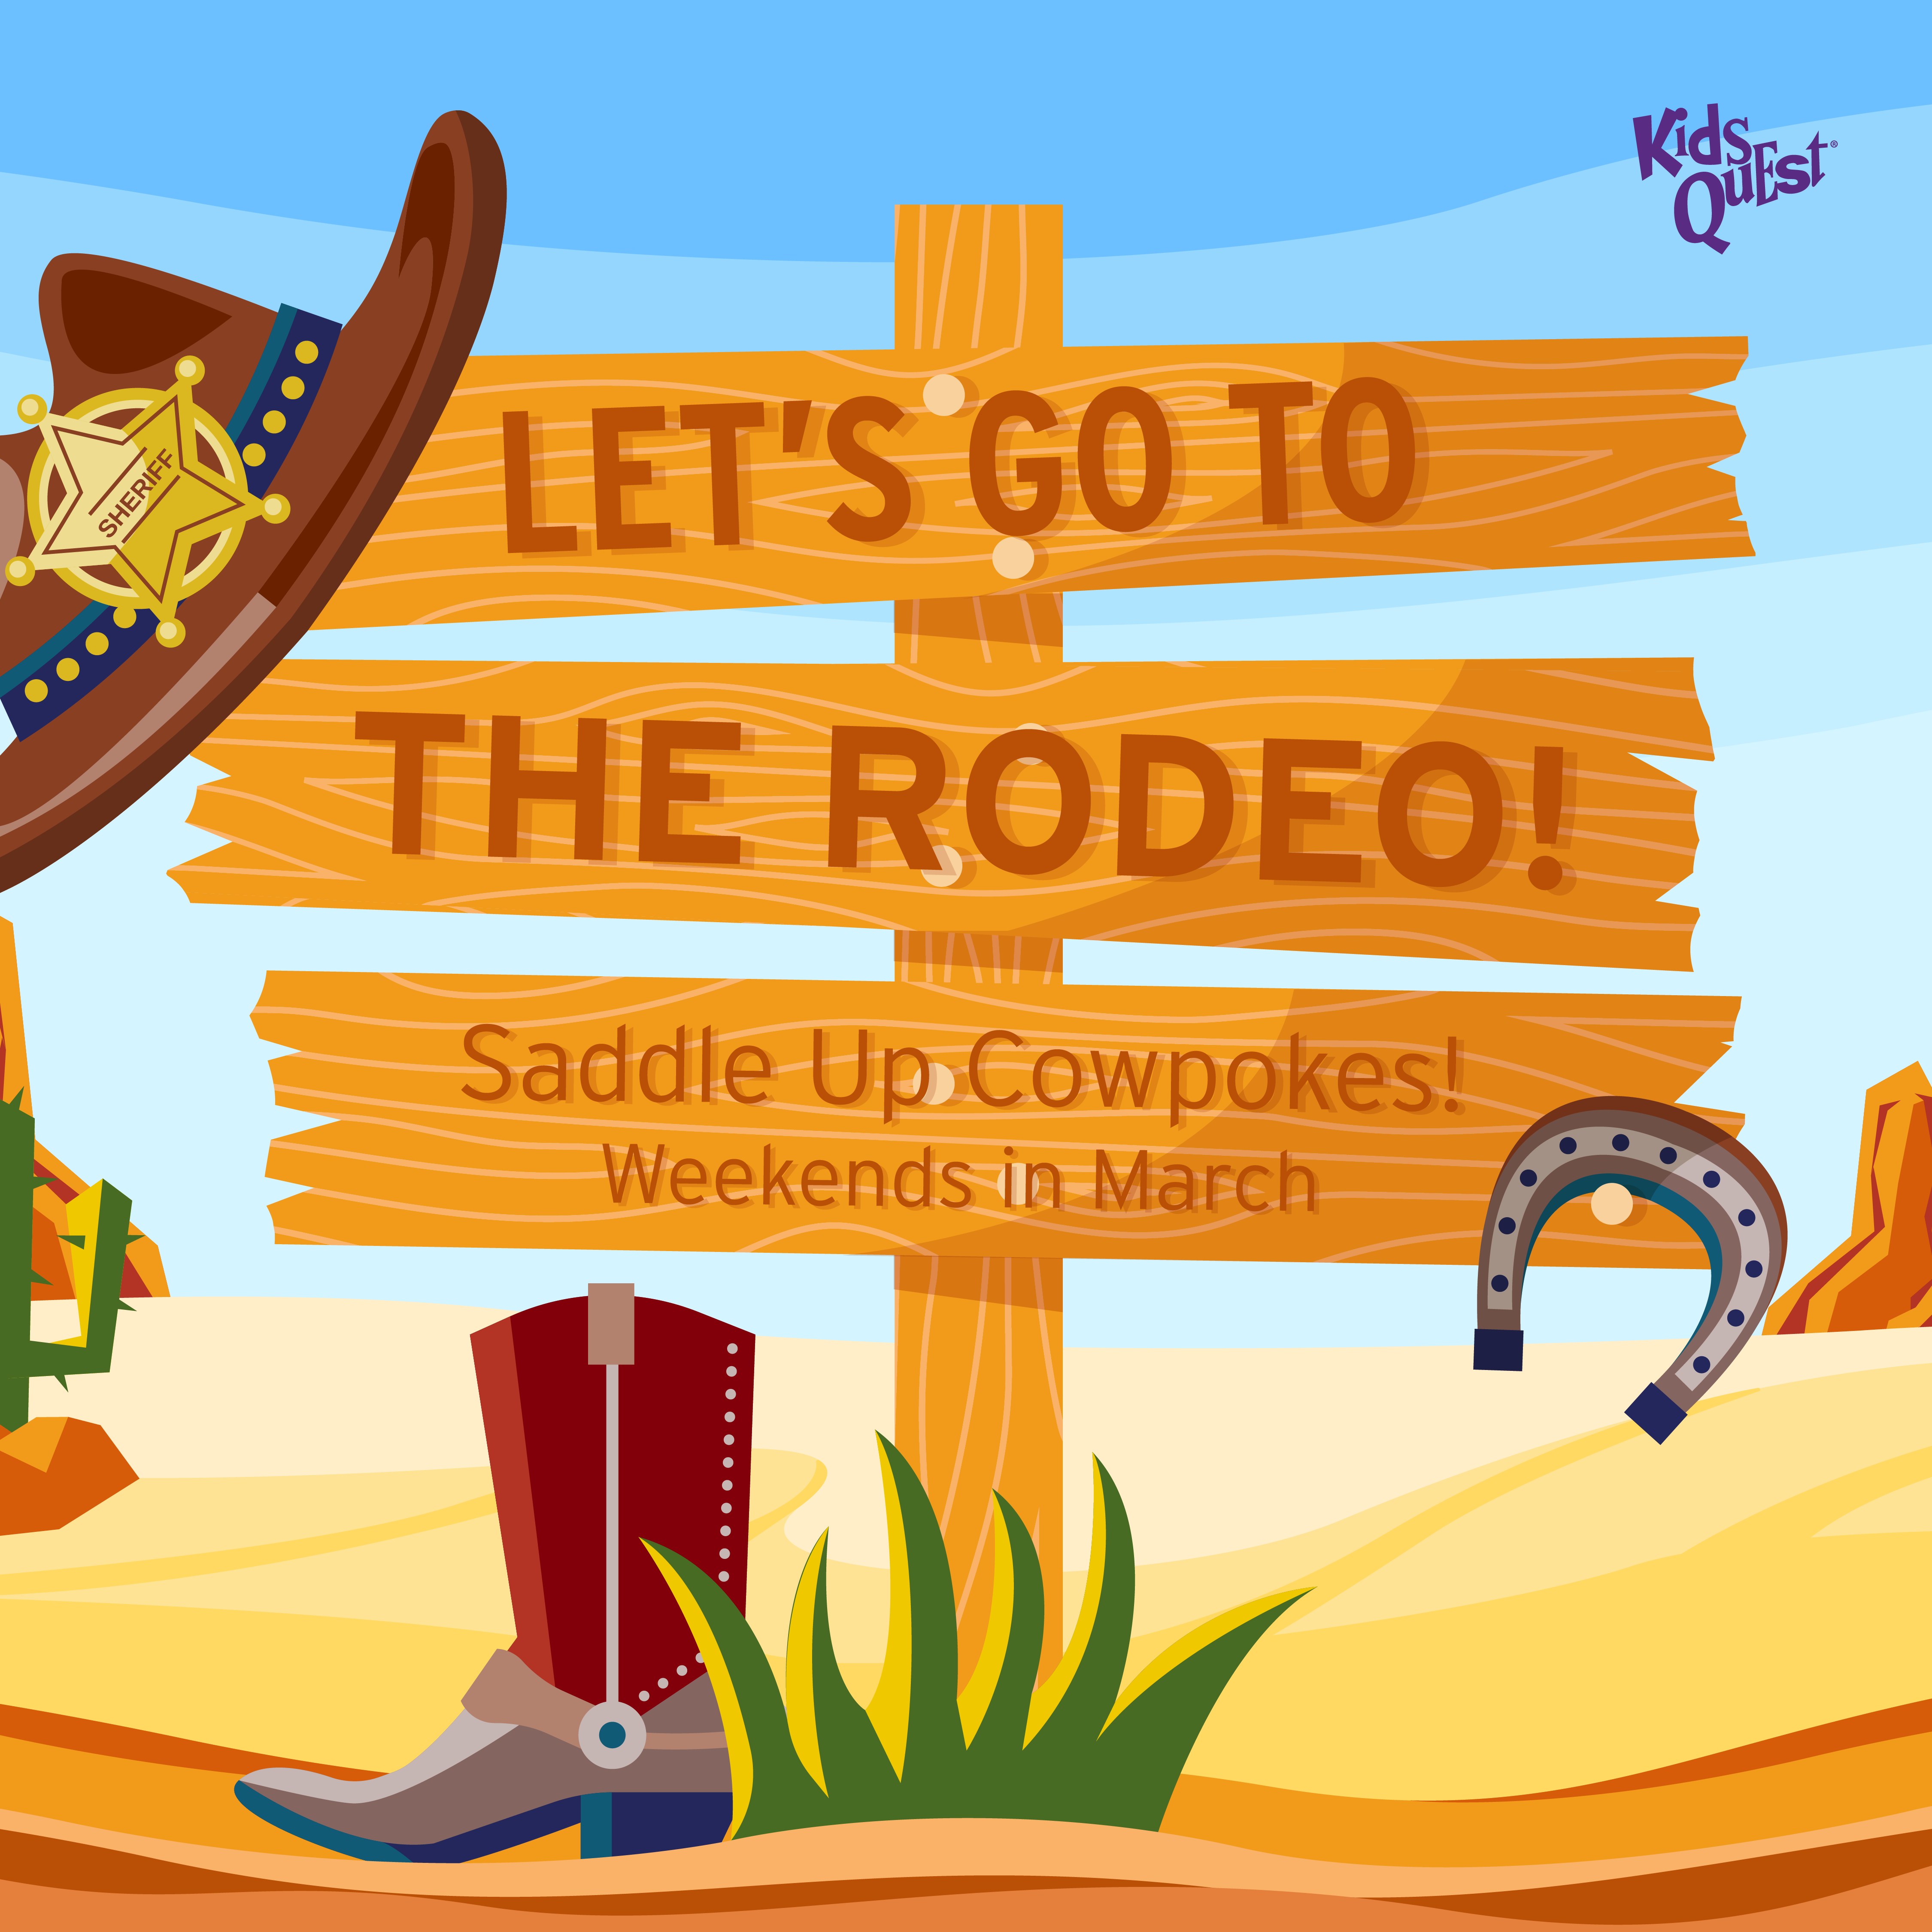 Let's Go to the Rodeo